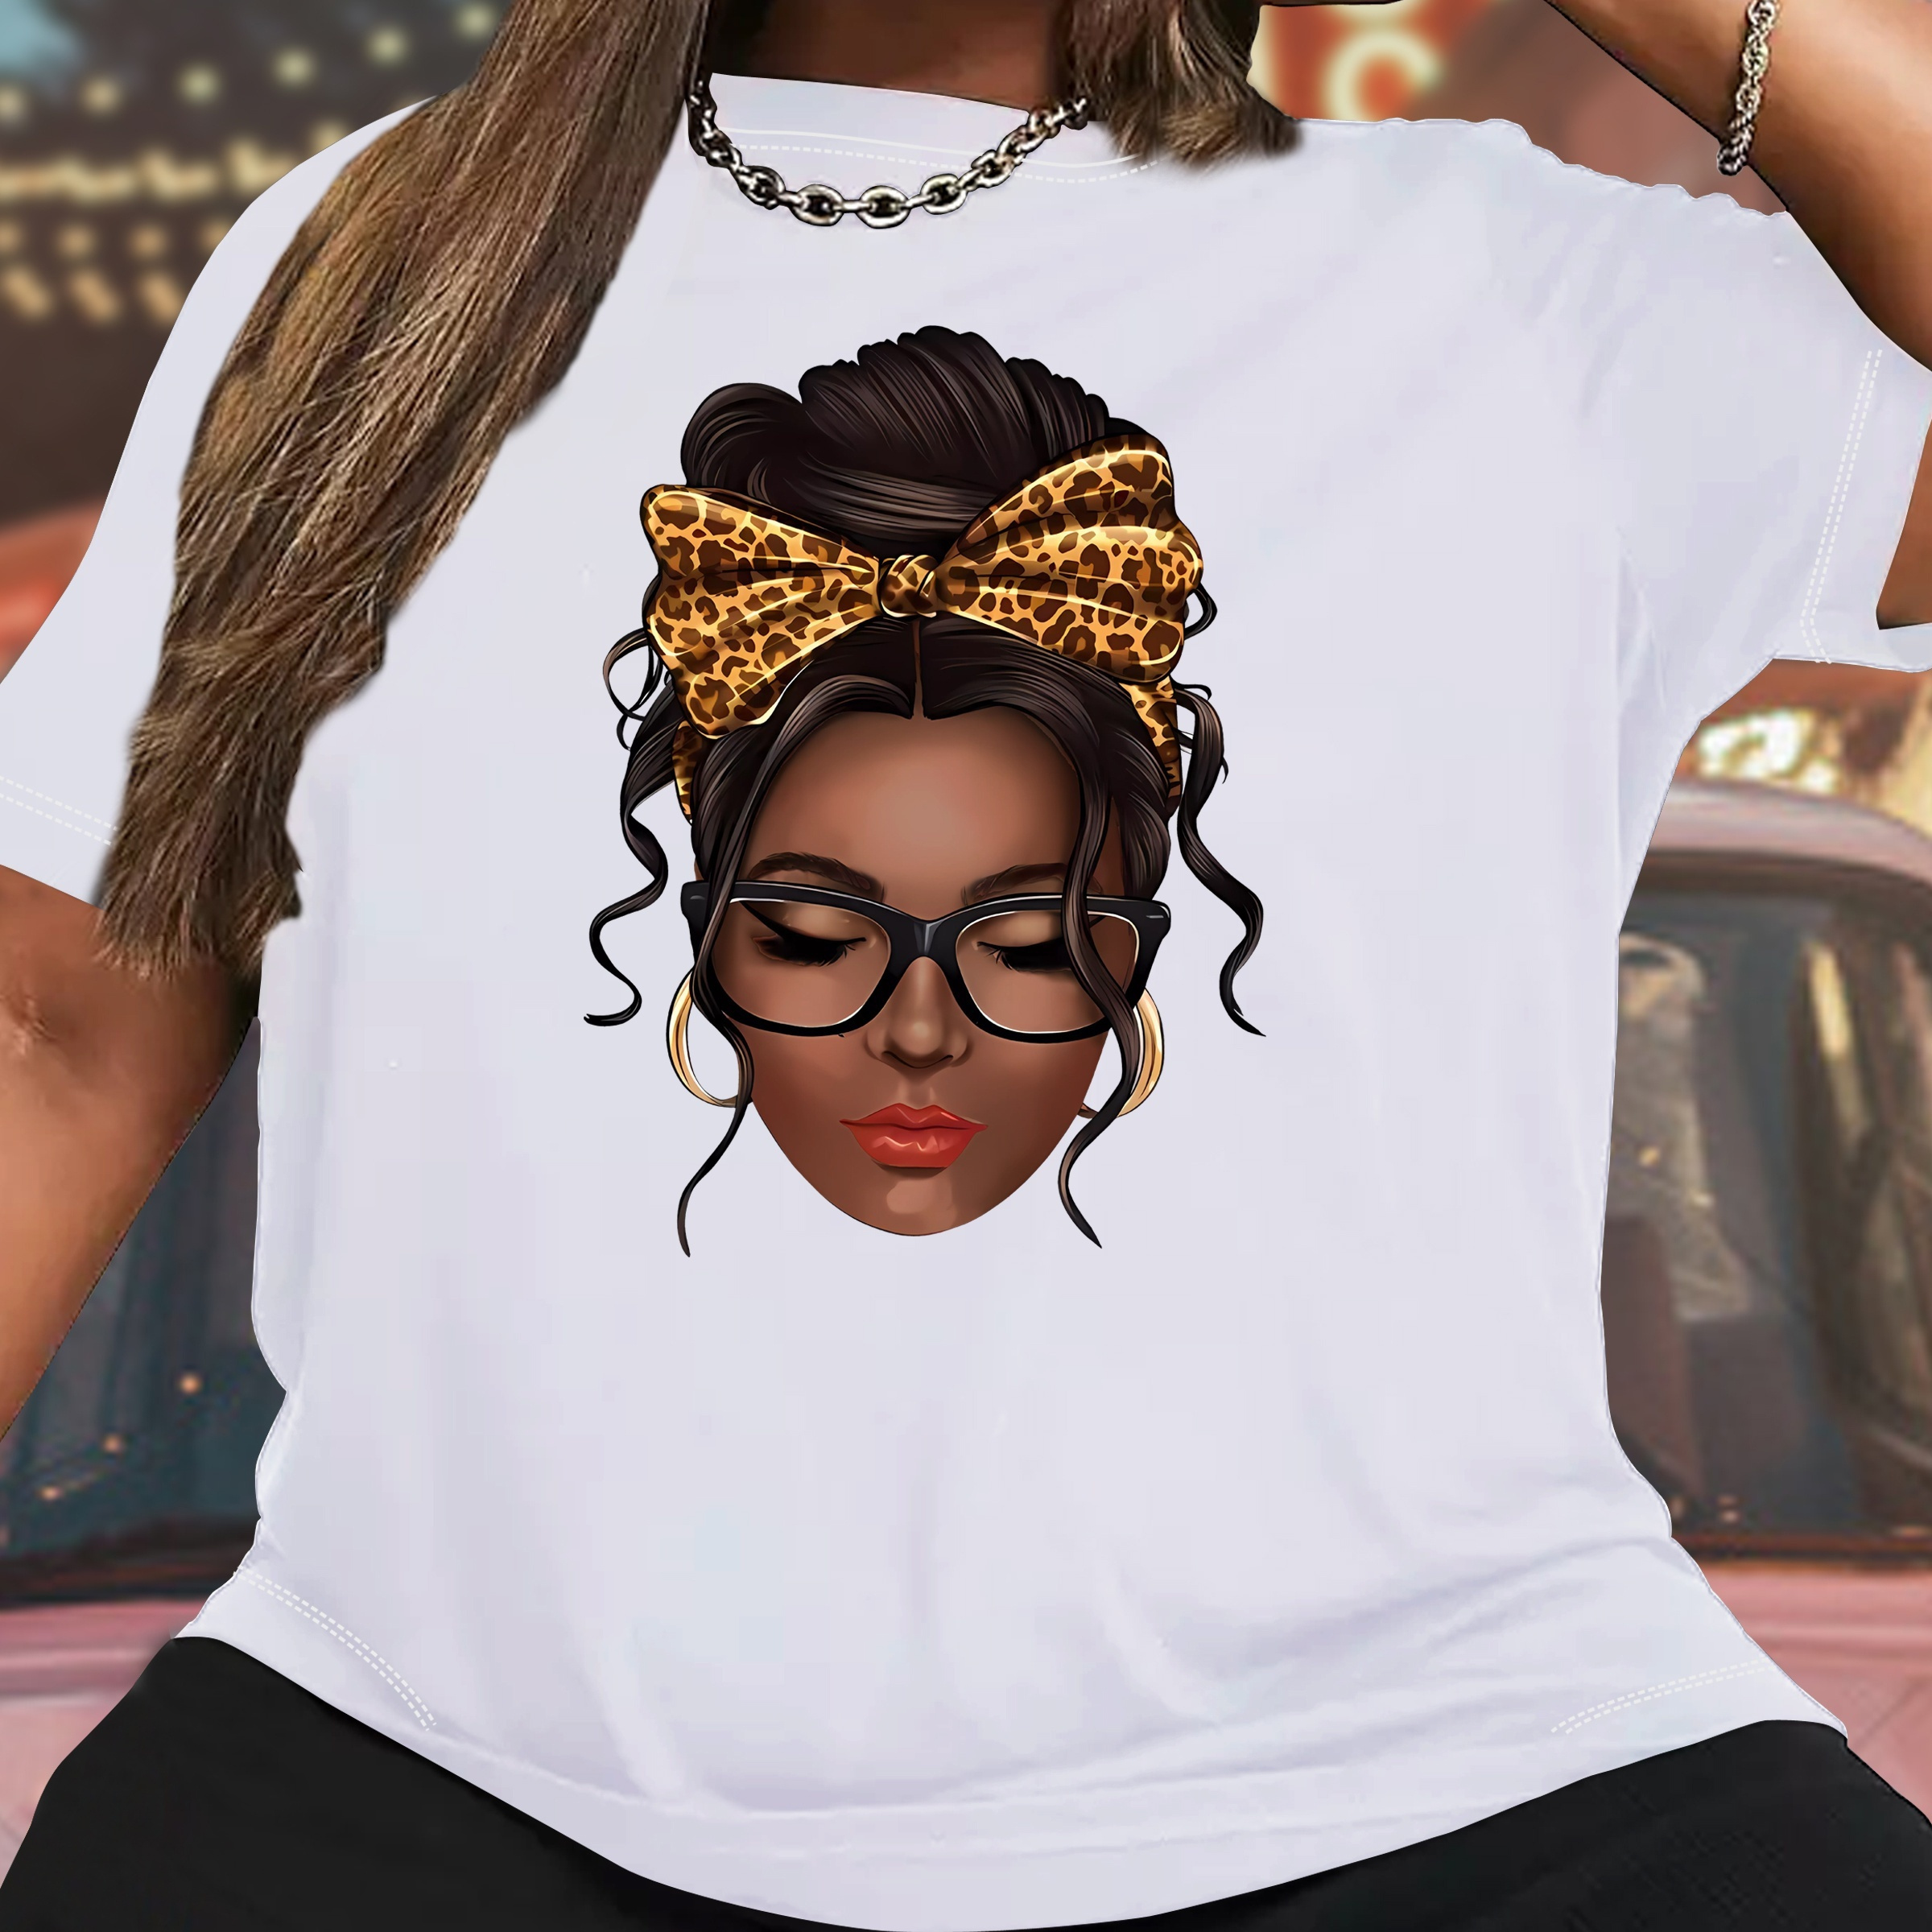 

Women's Casual Sports T-shirt Top, Plus Size Leopard Bow Lady Portrait Print Stretchy Round Neck Breathable Fabric Short Sleeve Fitness Tee Top